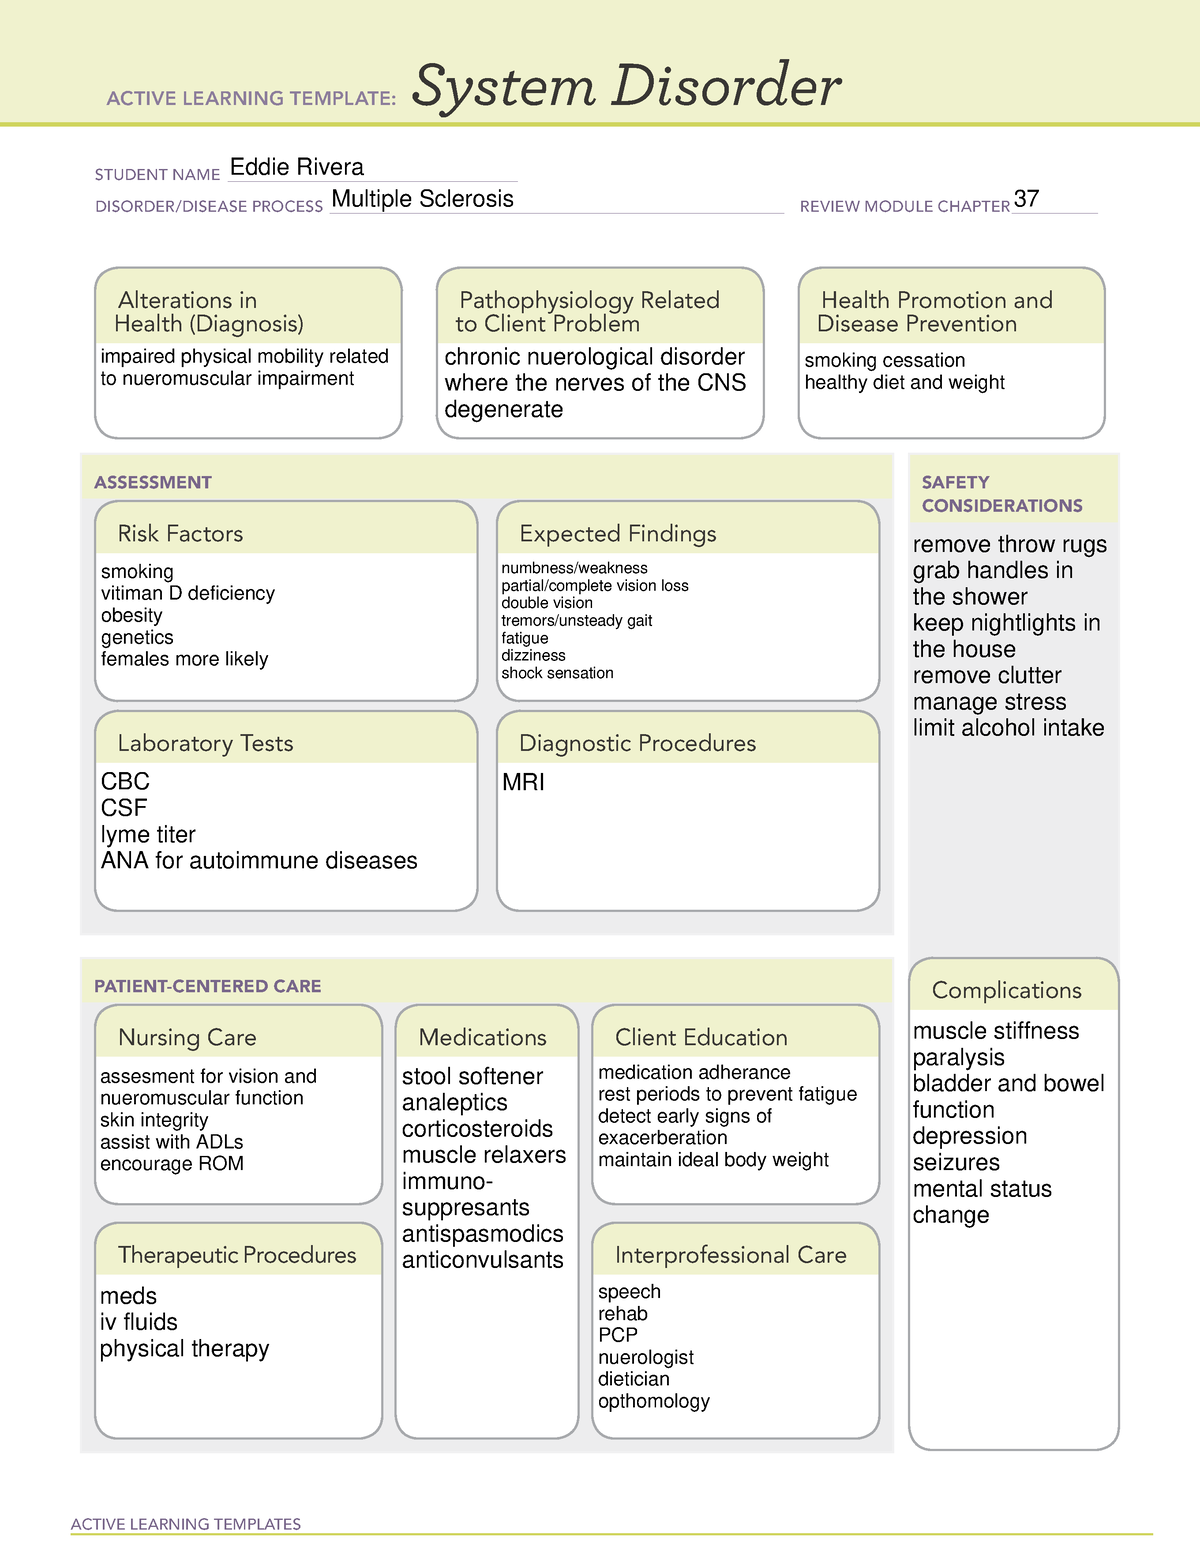 ATI Systems Disorder template ms ACTIVE LEARNING TEMPLATES System